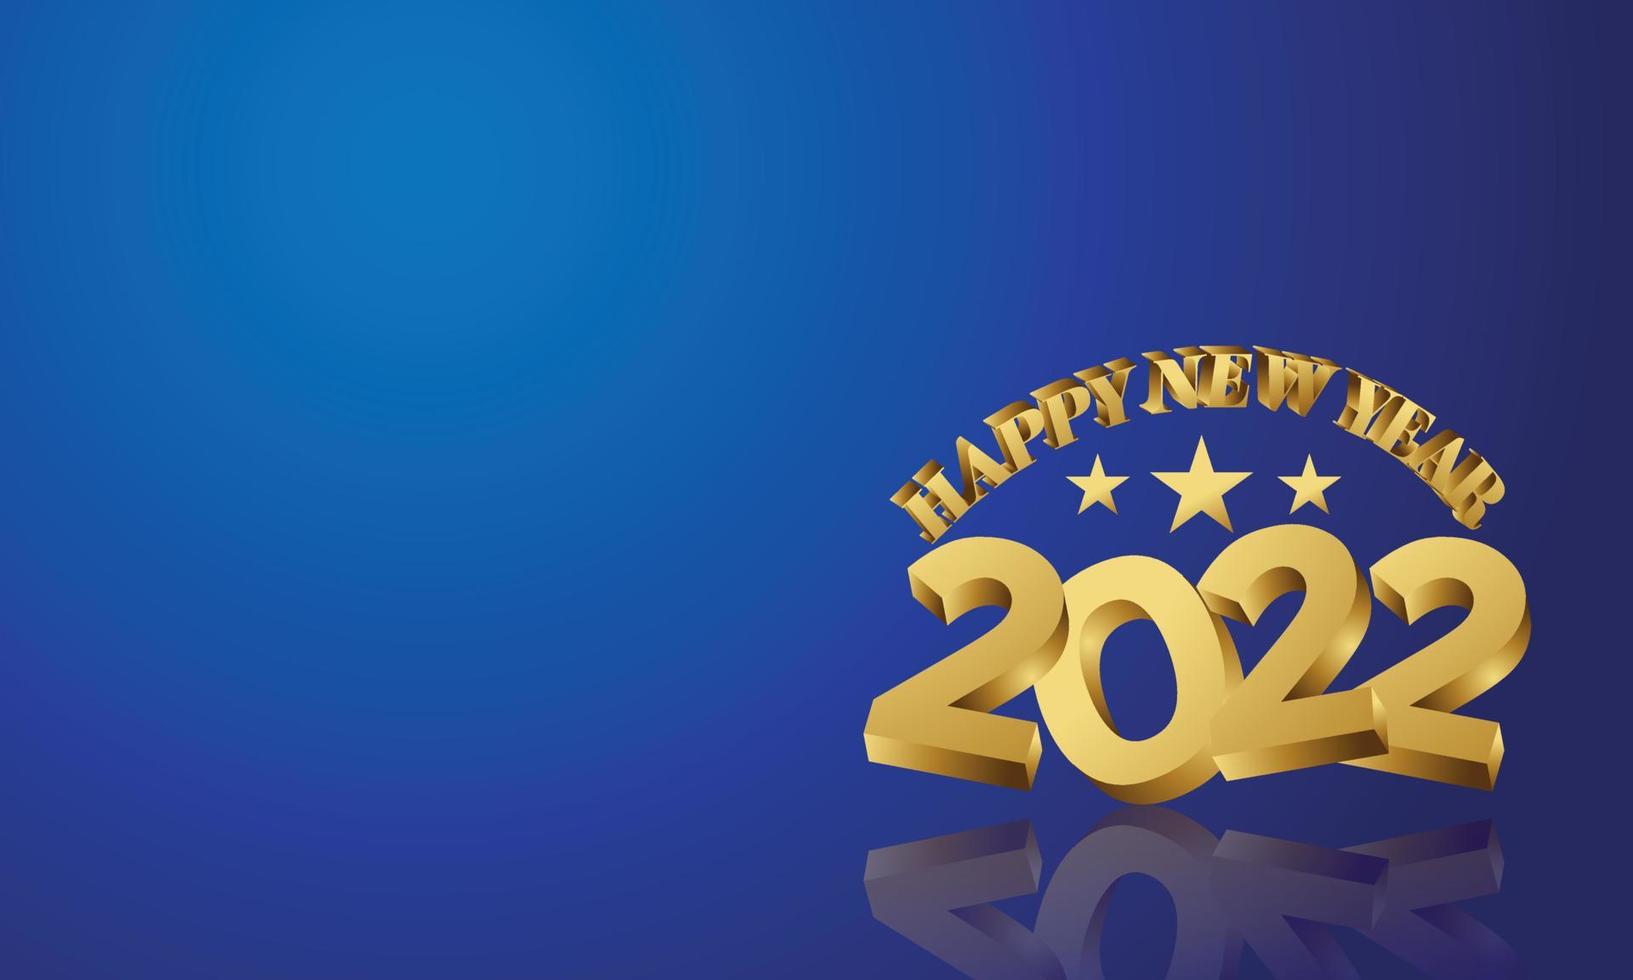 happy new year background in gold and blue color vector